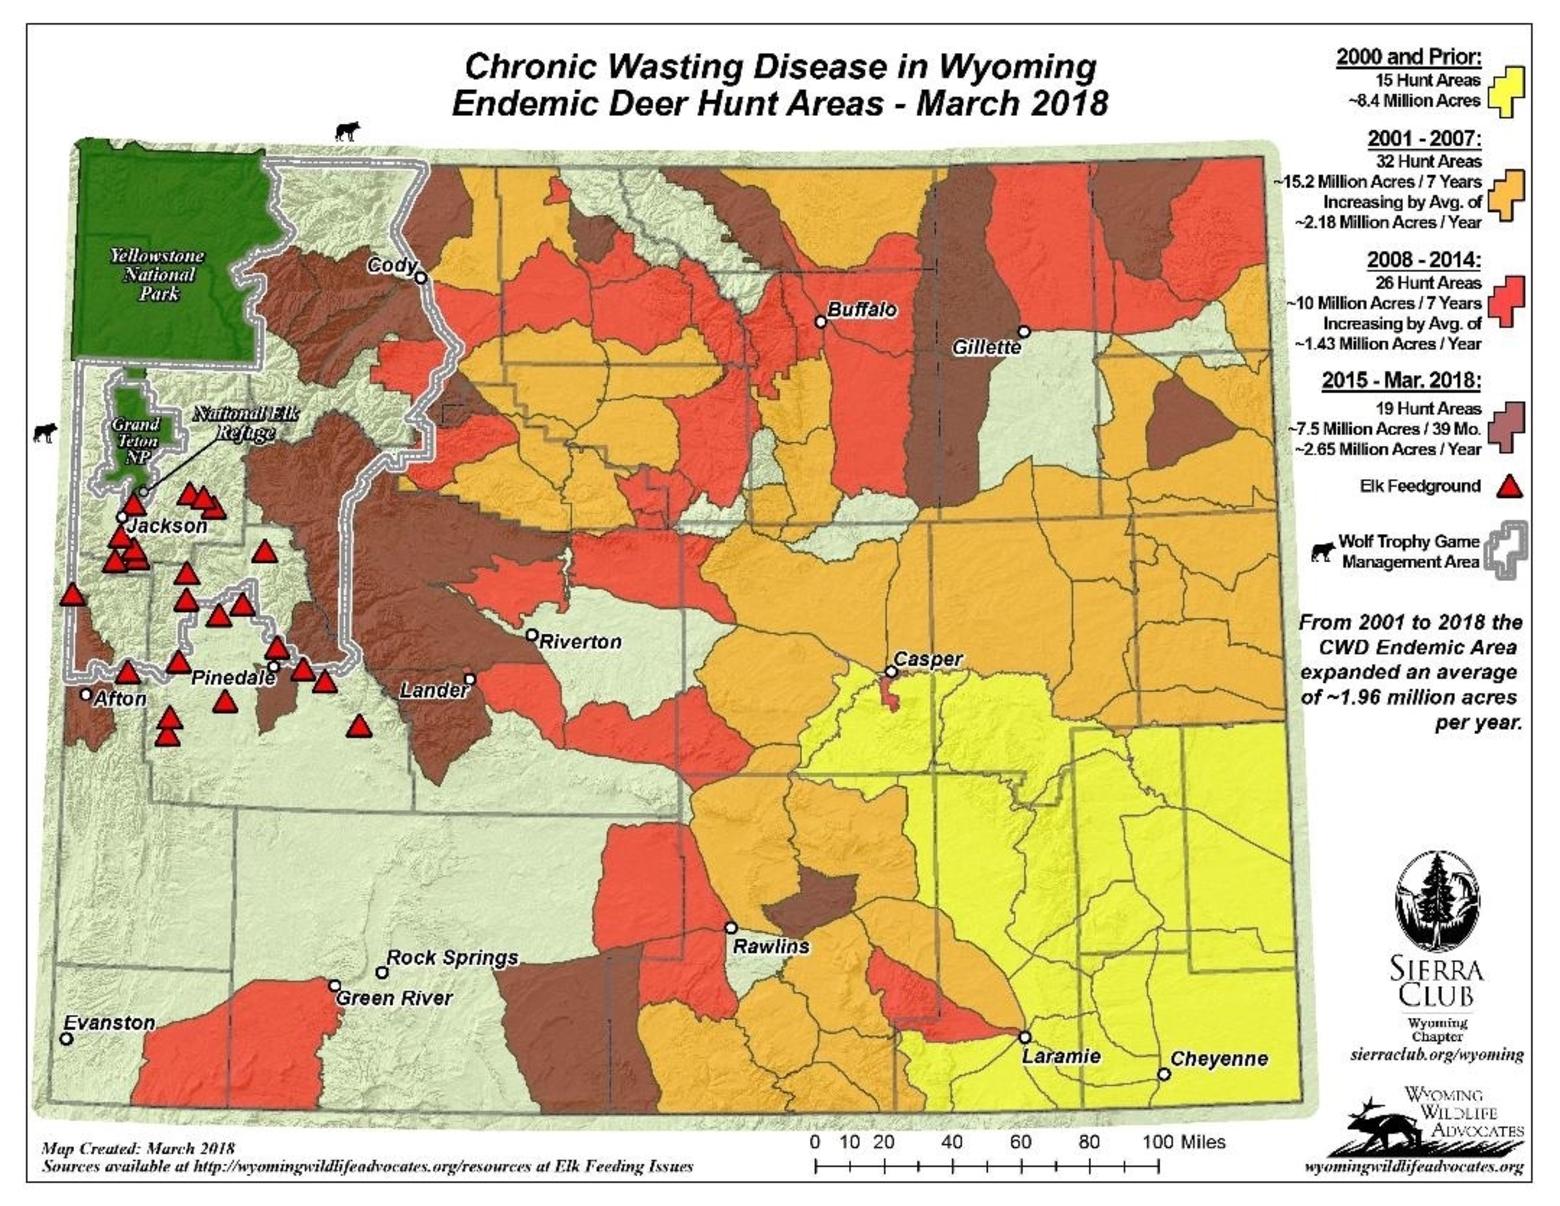 For years, the Sierra Club and Wyoming Wildlife Advocates have been tracking the march of Chronic Wasting Disease, based on state data, from its original hotspot in the southeastern corner of the state (marked in yellow) toward the Greater Yellowstone Ecosystem. Yellowstone National Park is marked in green.  In recent years the spread has accelerated and the brown coloration shows how CWD is now present in deer in Jackson Hole and literally on Yellowstone Park's eastern doorstep. Many experts believe that its confirmation in elk is imminent and could be game changing for the health of the region's famous wapiti herds.